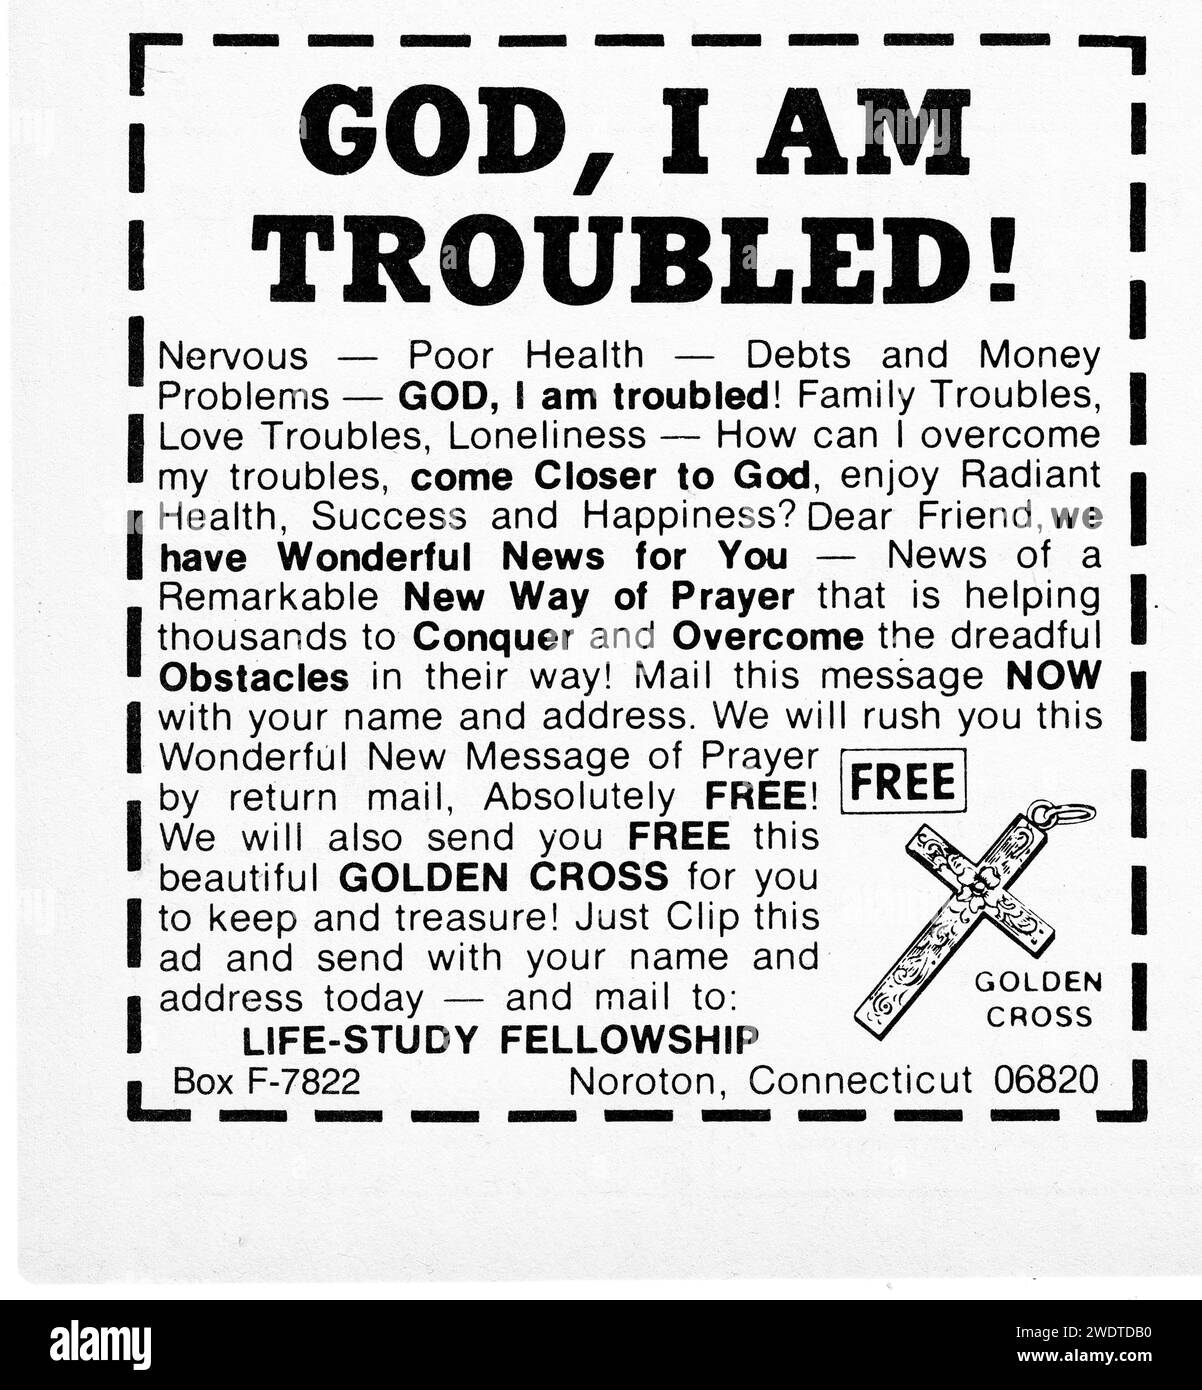 God I Am Troubled. An ad in a late 1970s sports magazine for a free prayer message. It's for t troubled readers along with a free golden cross. Sponsored by the still extant Life - Study Fellowship in Connecticut. Stock Photo